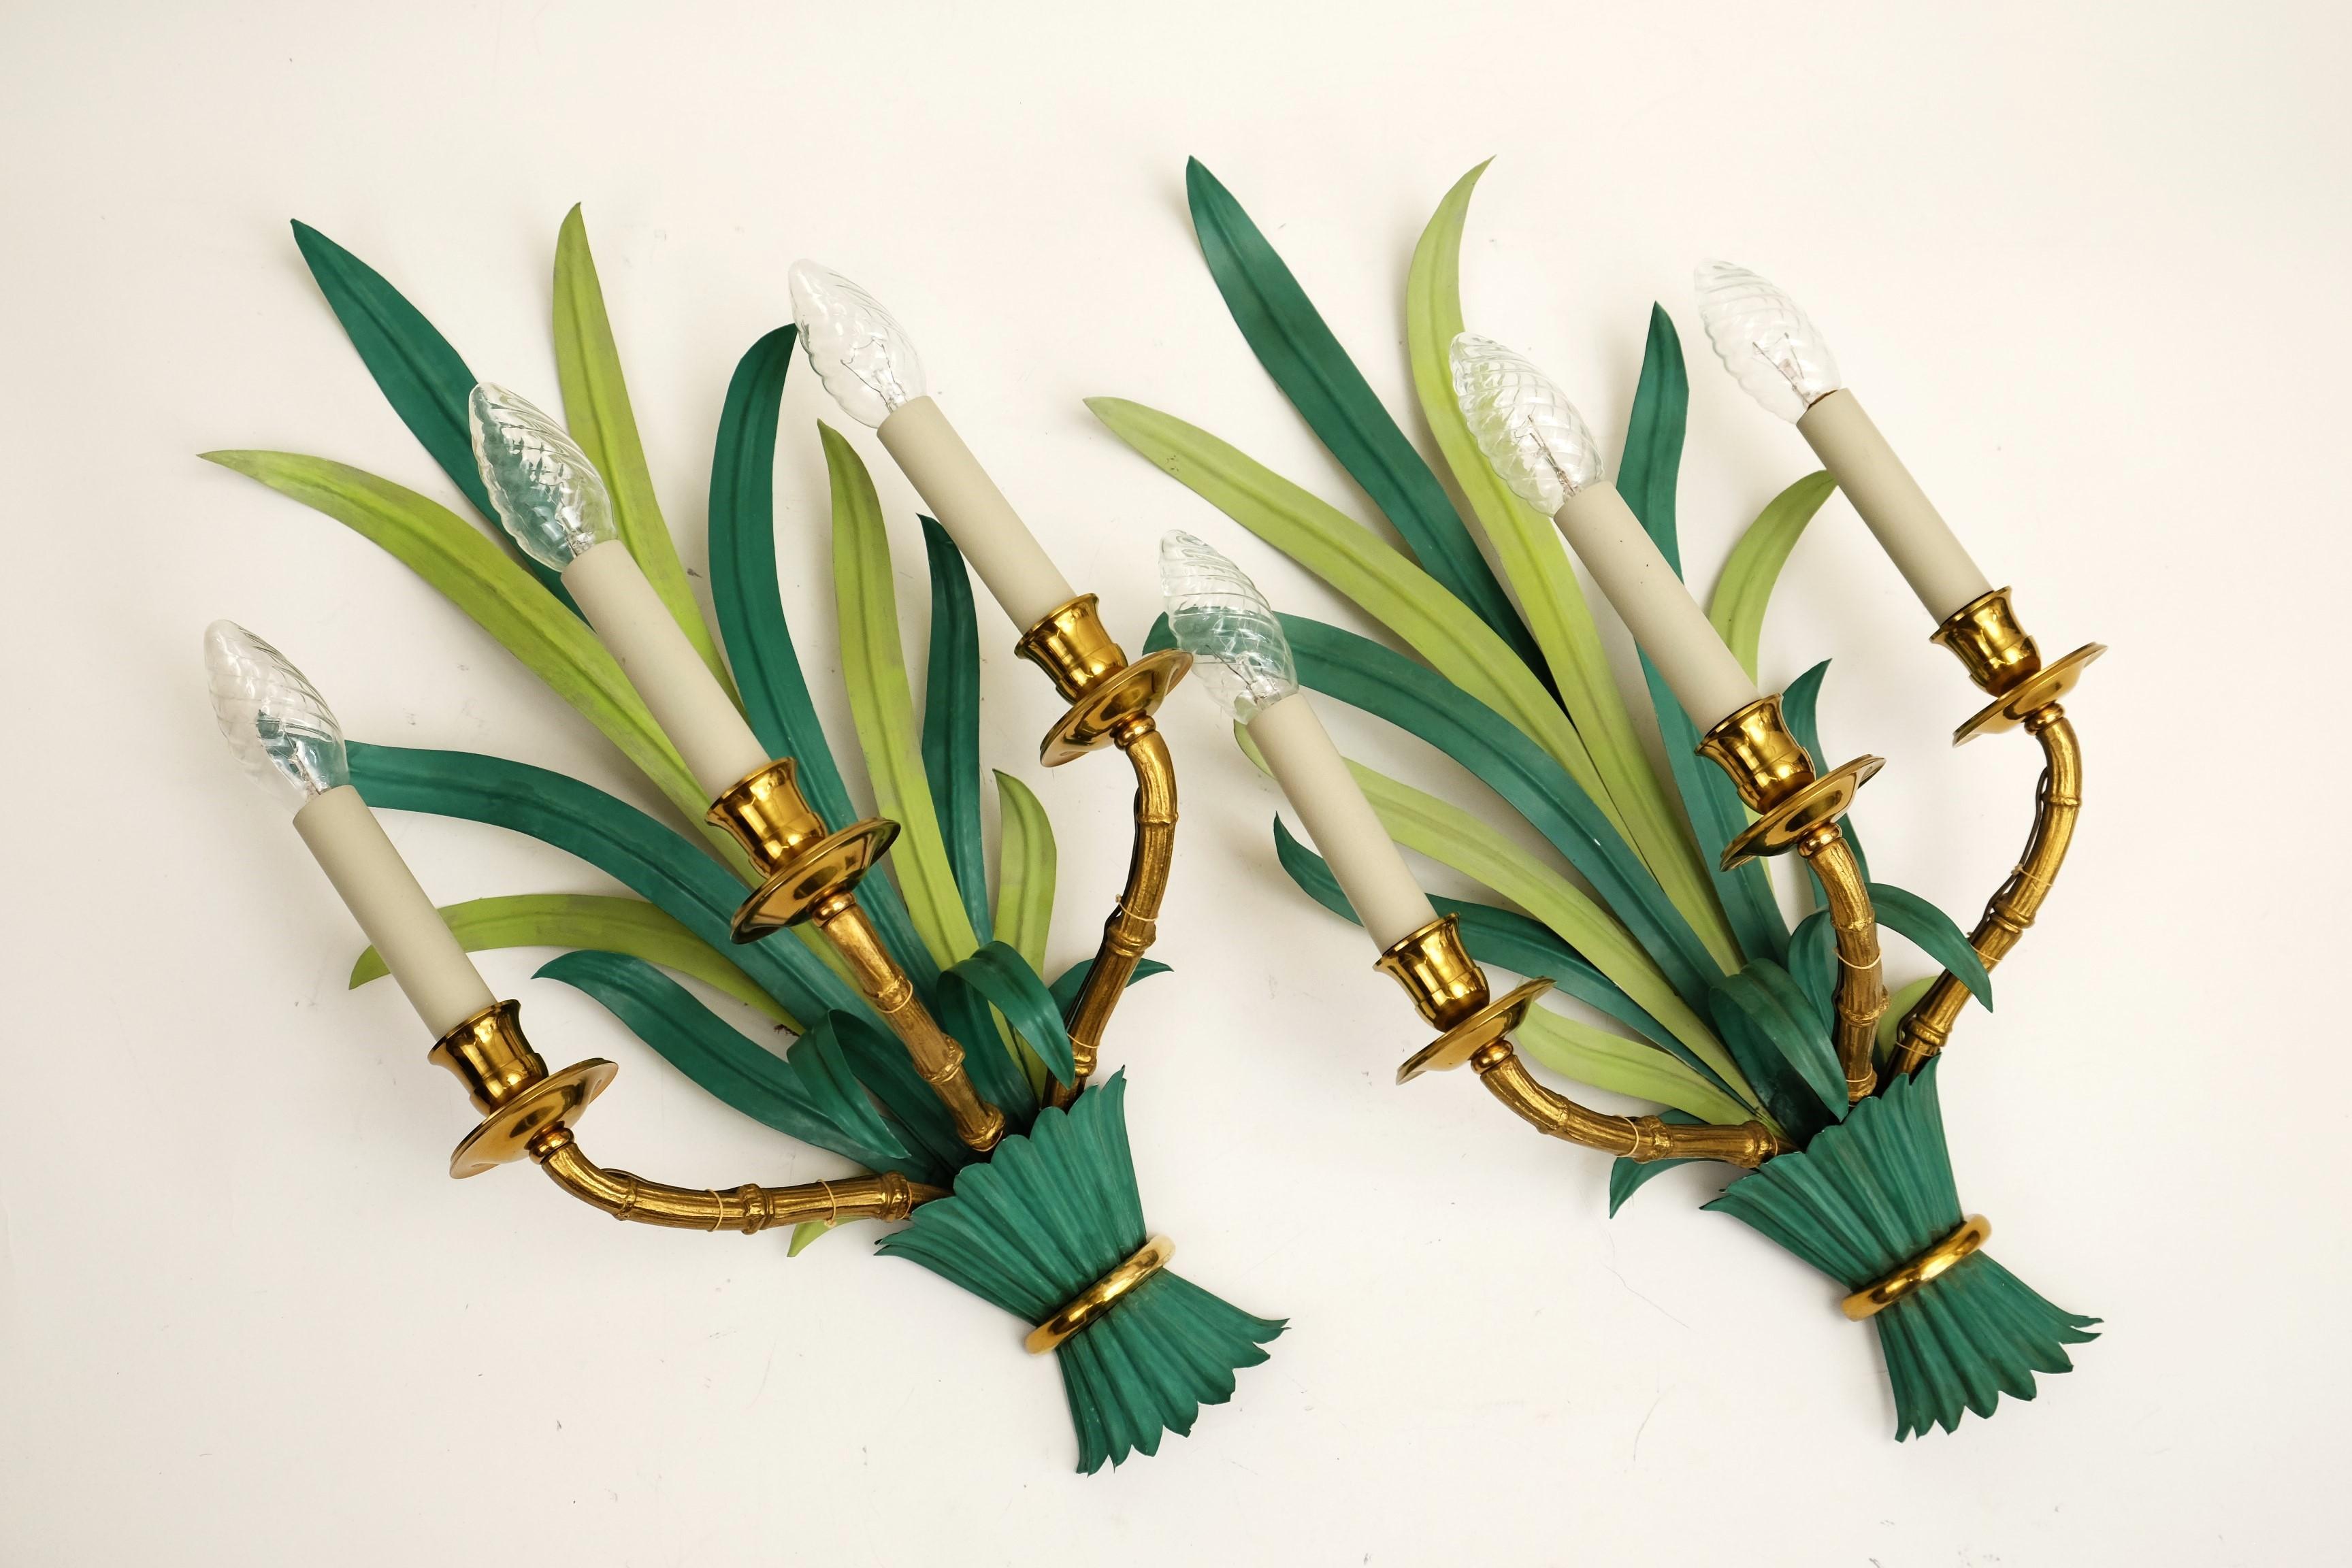 A pair of extraordinary sconces by Maison Bagues with green painted long palm leaves and three bamboo shaped arms of brass.

Stunning lamps and a real asset to any home.

Condition:
Good vintage condition with some wear to paint consistent with use